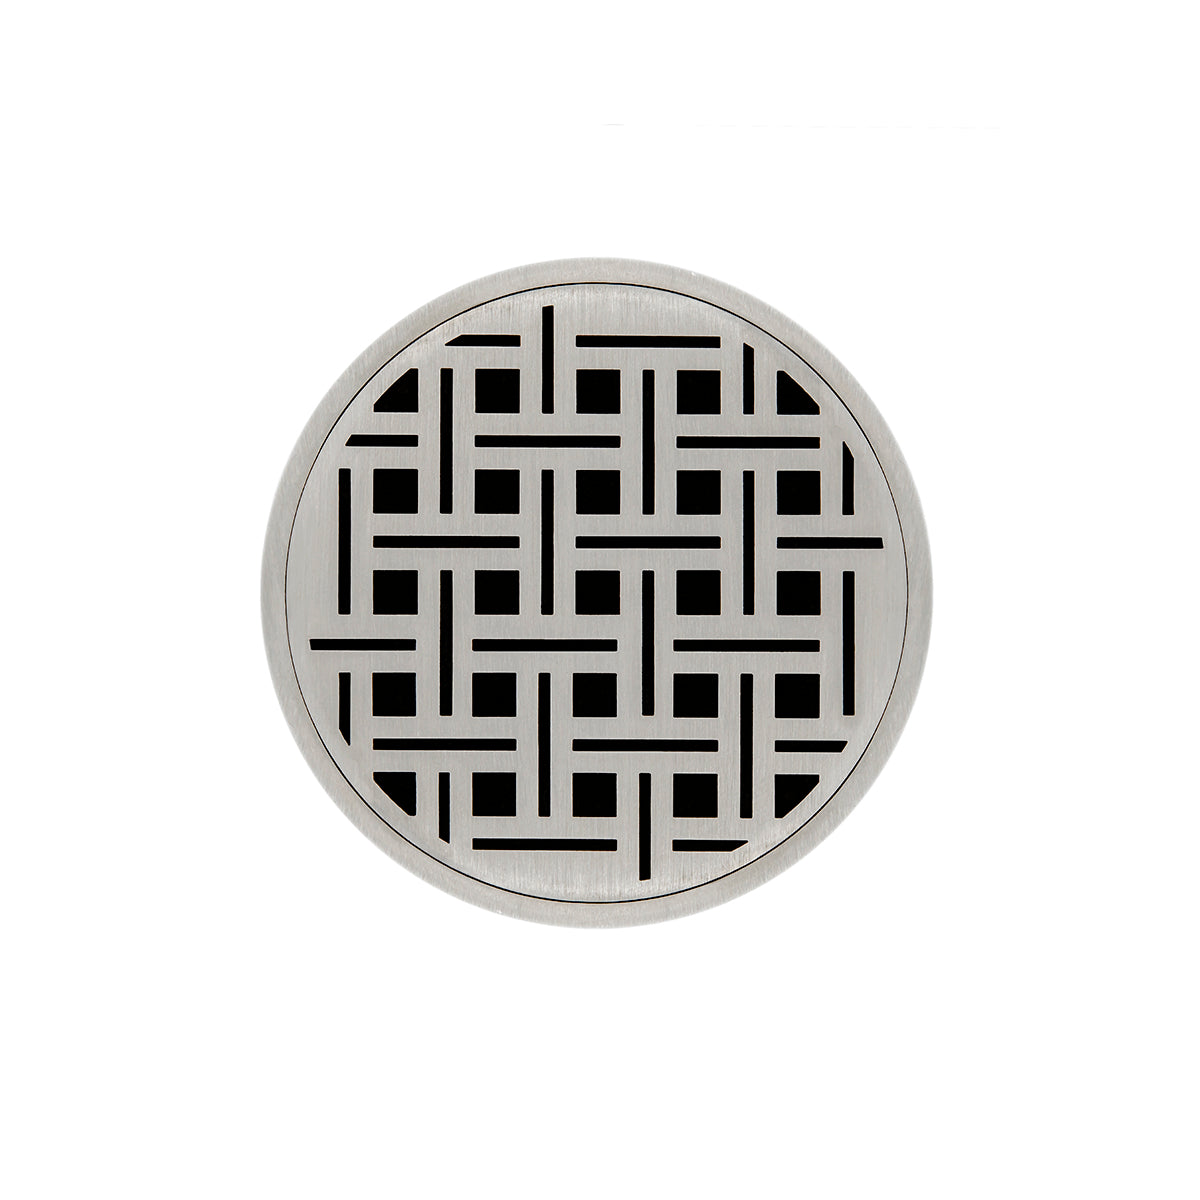 Infinity Drain 5" Round RVDB 5 Premium Center Drain Kit with Weave Pattern Decorative Plate with PVC Bonded Flange Drain Body, 2", 3" and 4" Outlet